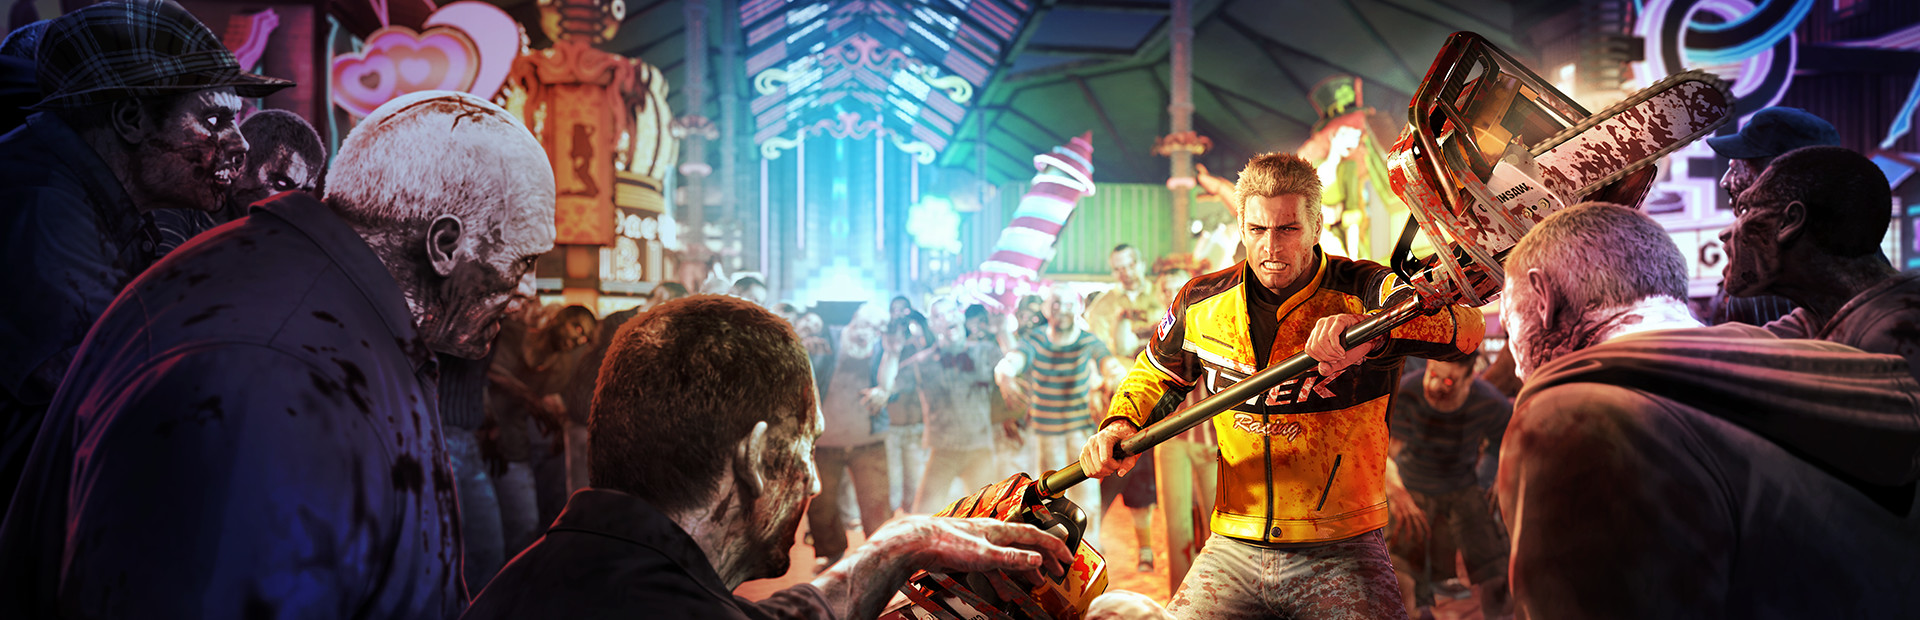 Dead Rising 2 cover image